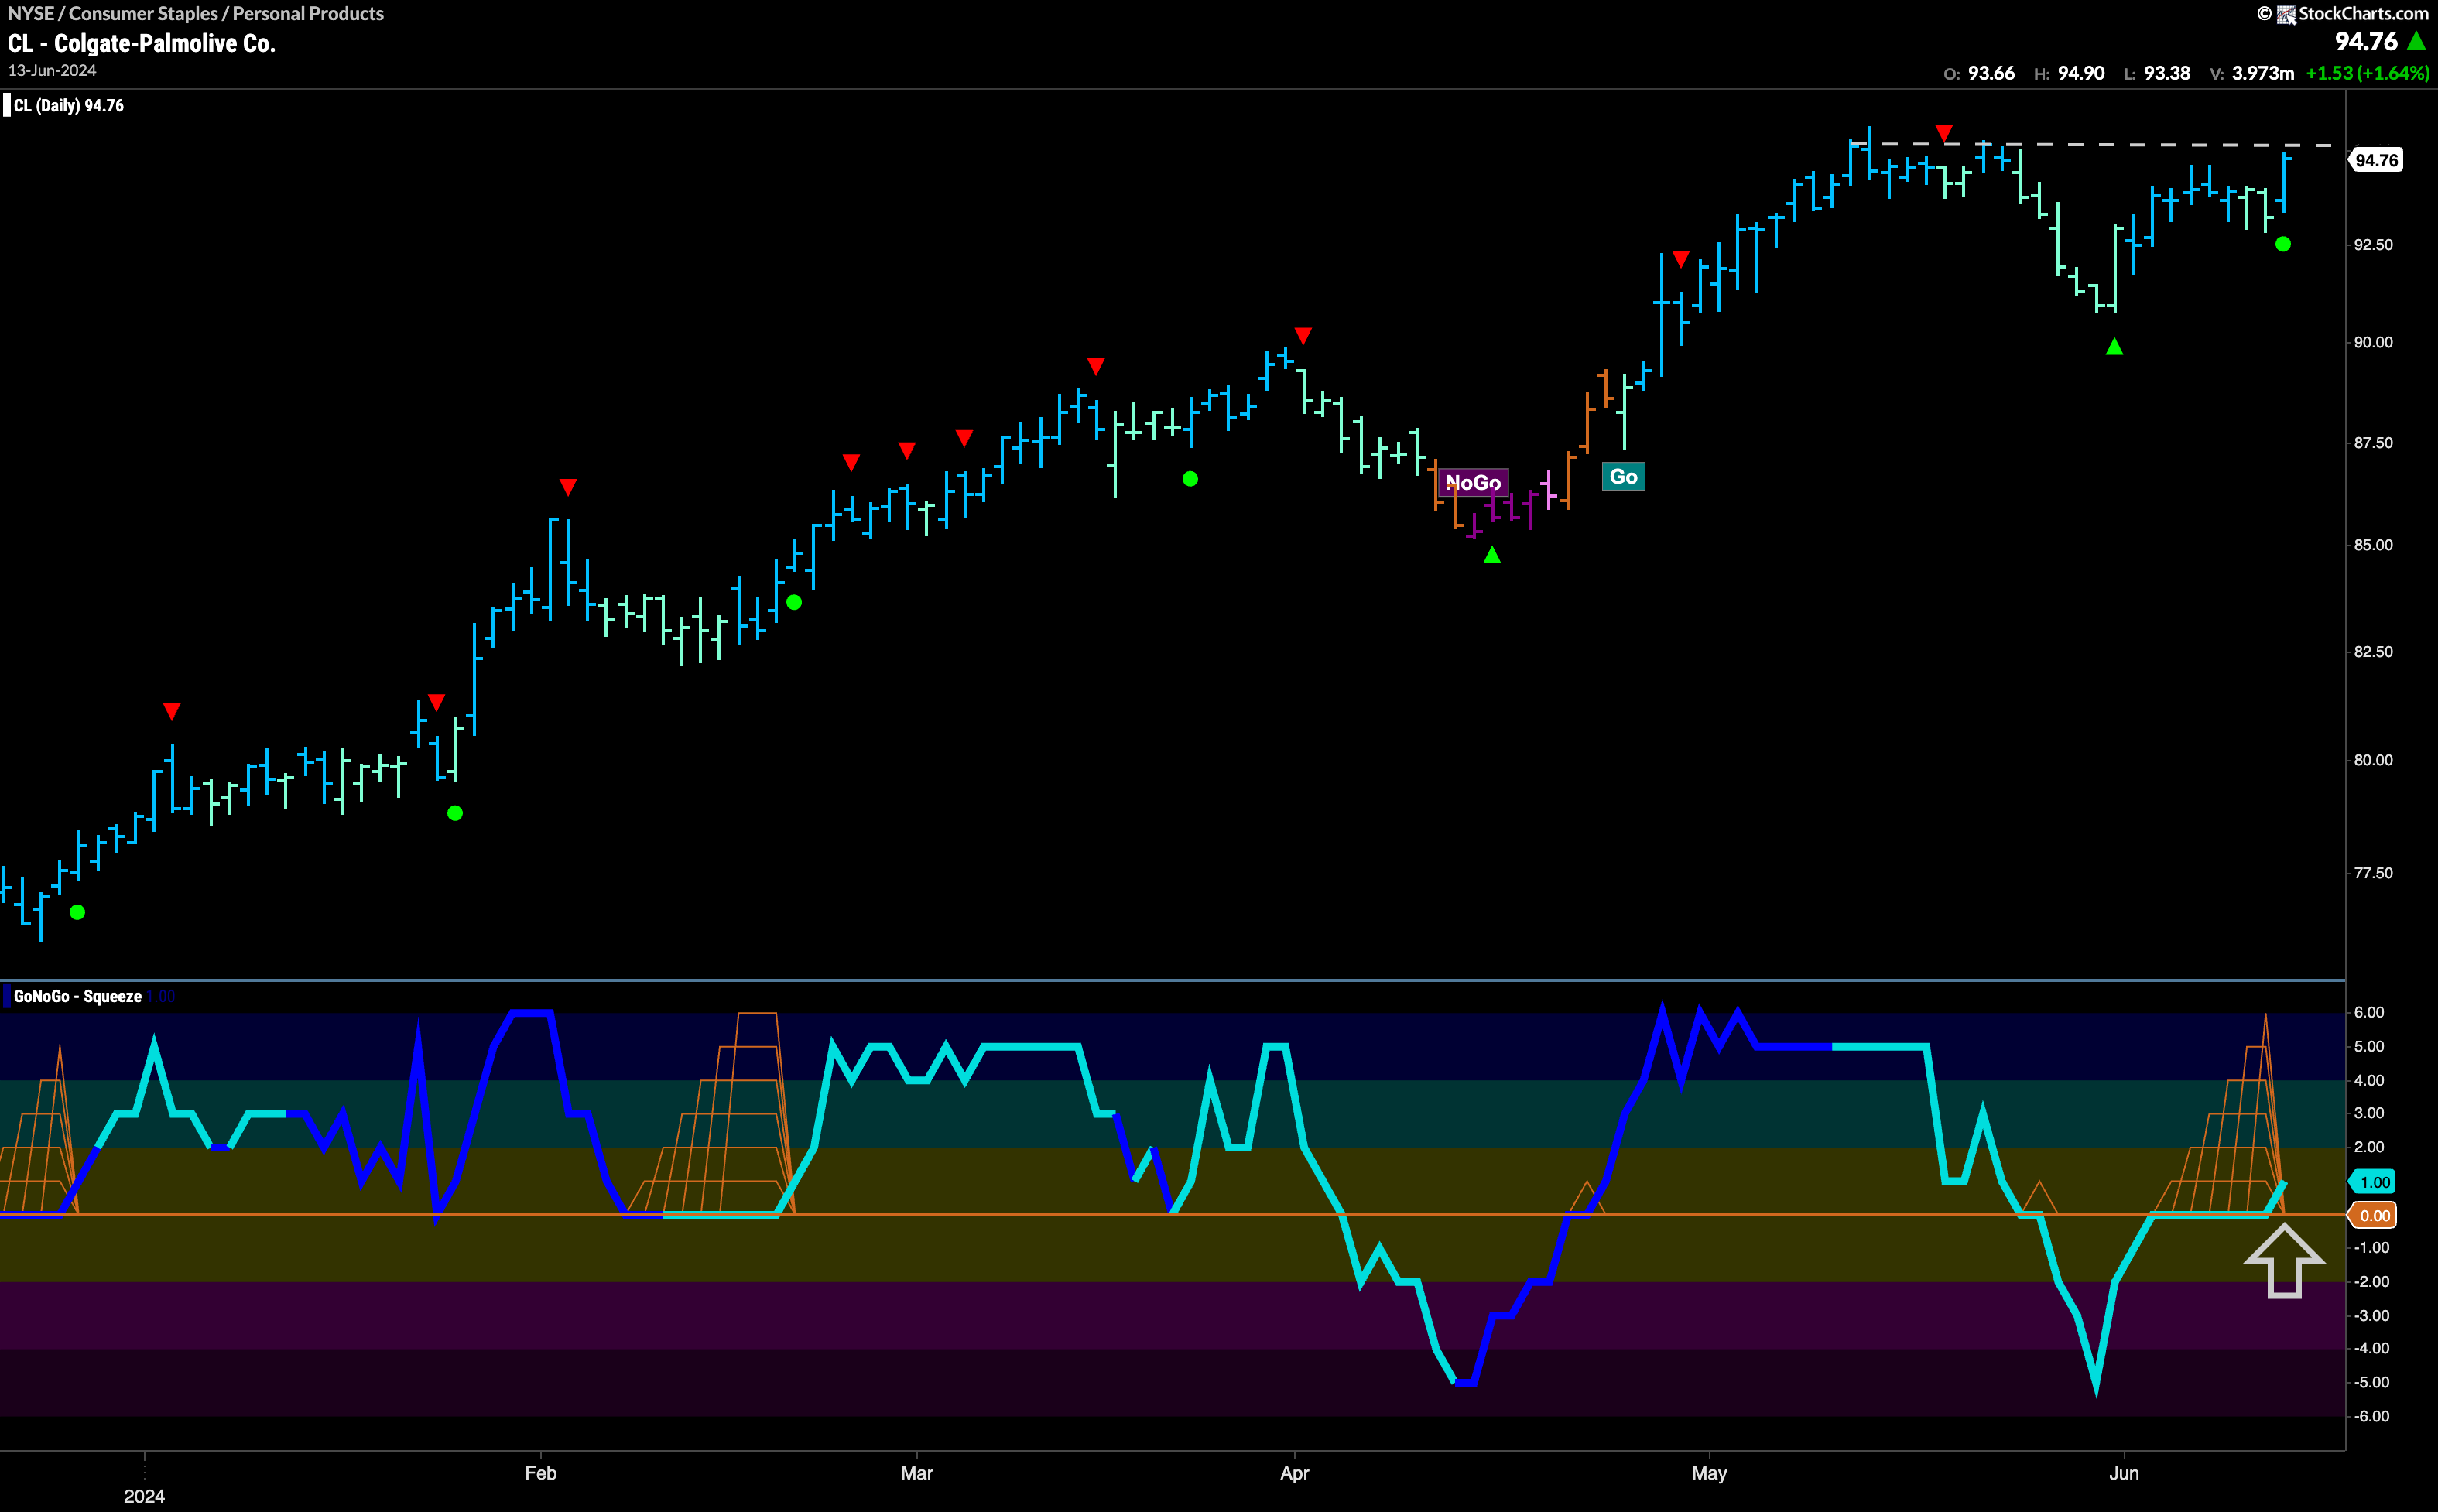 $CL Sees Signs of Trend Continuation Close to Prior Highs